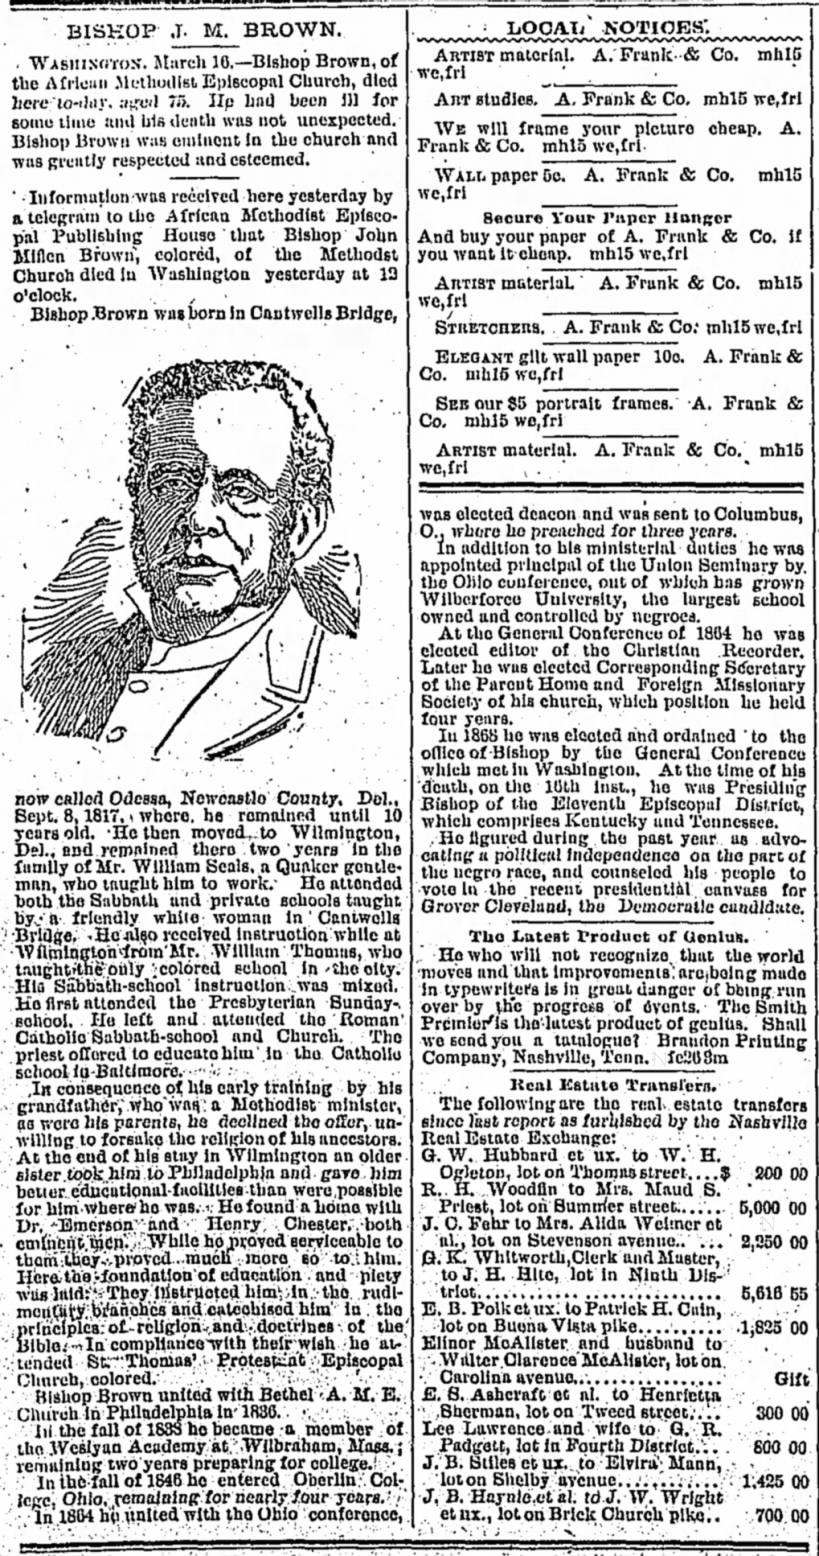 Bishop J. M. Brown, The Tennessean (Nashville, Tennessee) March 17, 1893, page 2